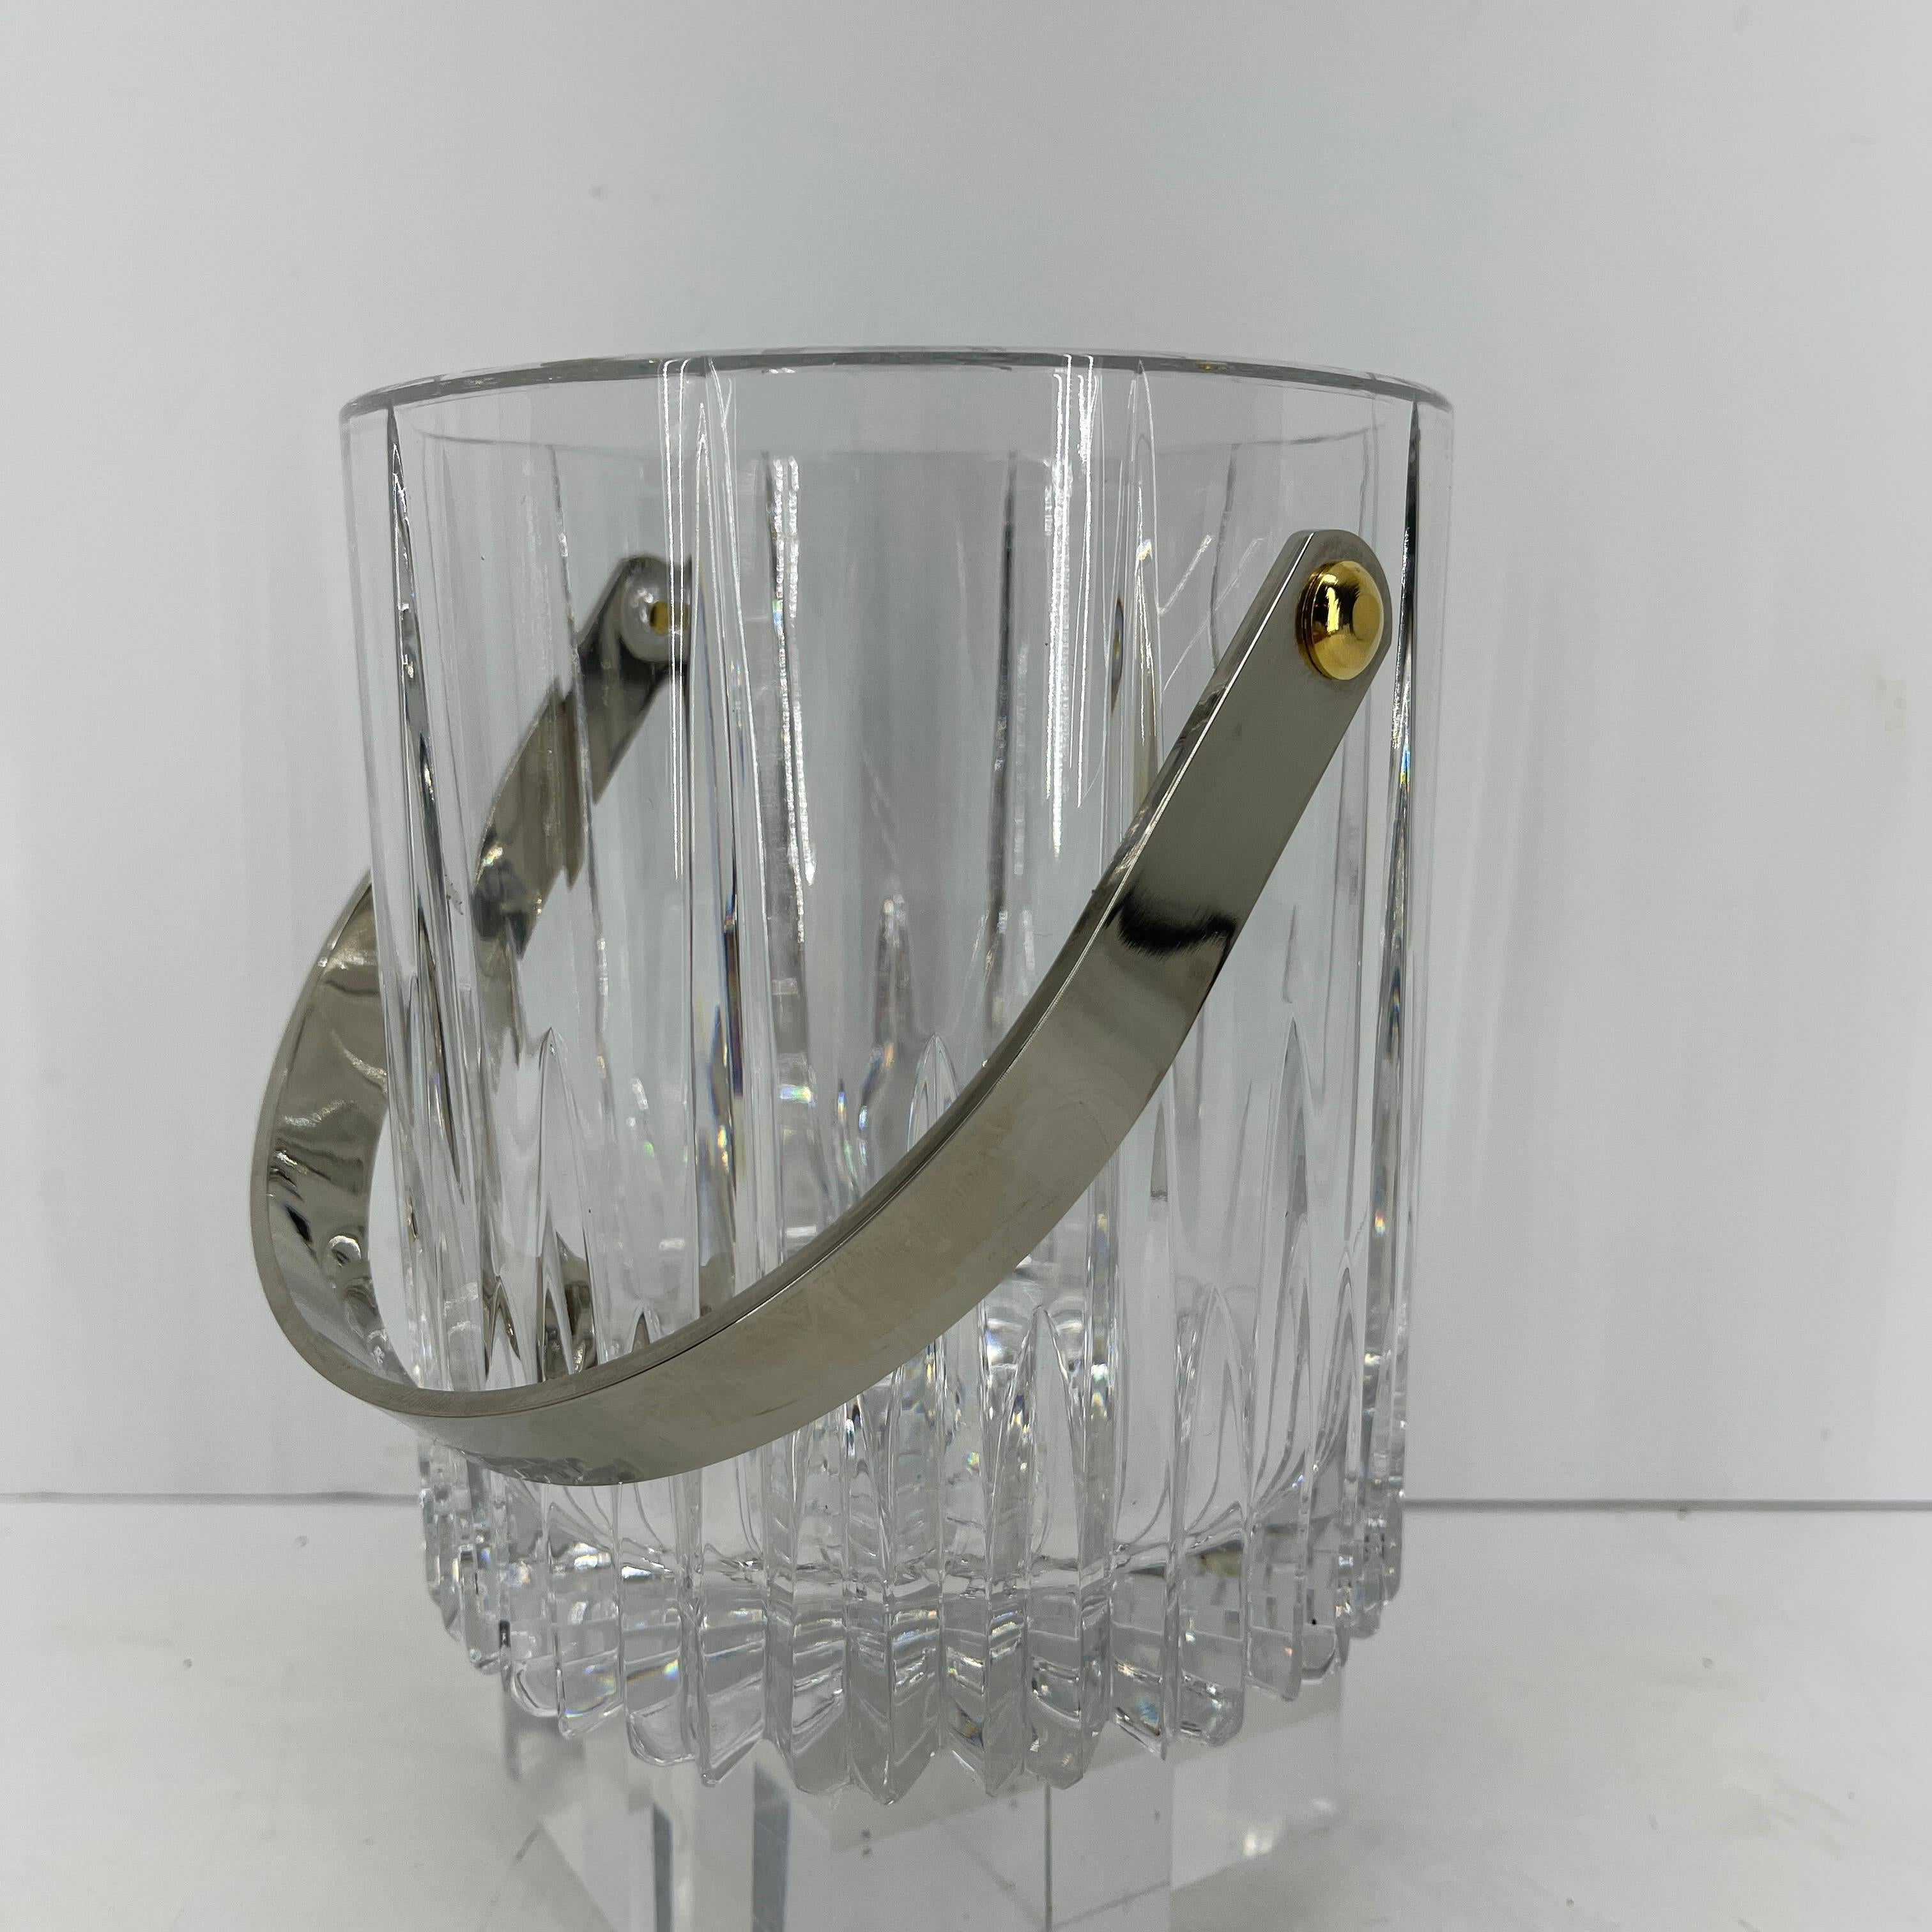 Late 20th Century Vintage Cut Crystal Ice Bucket with Polished Chrome Handle